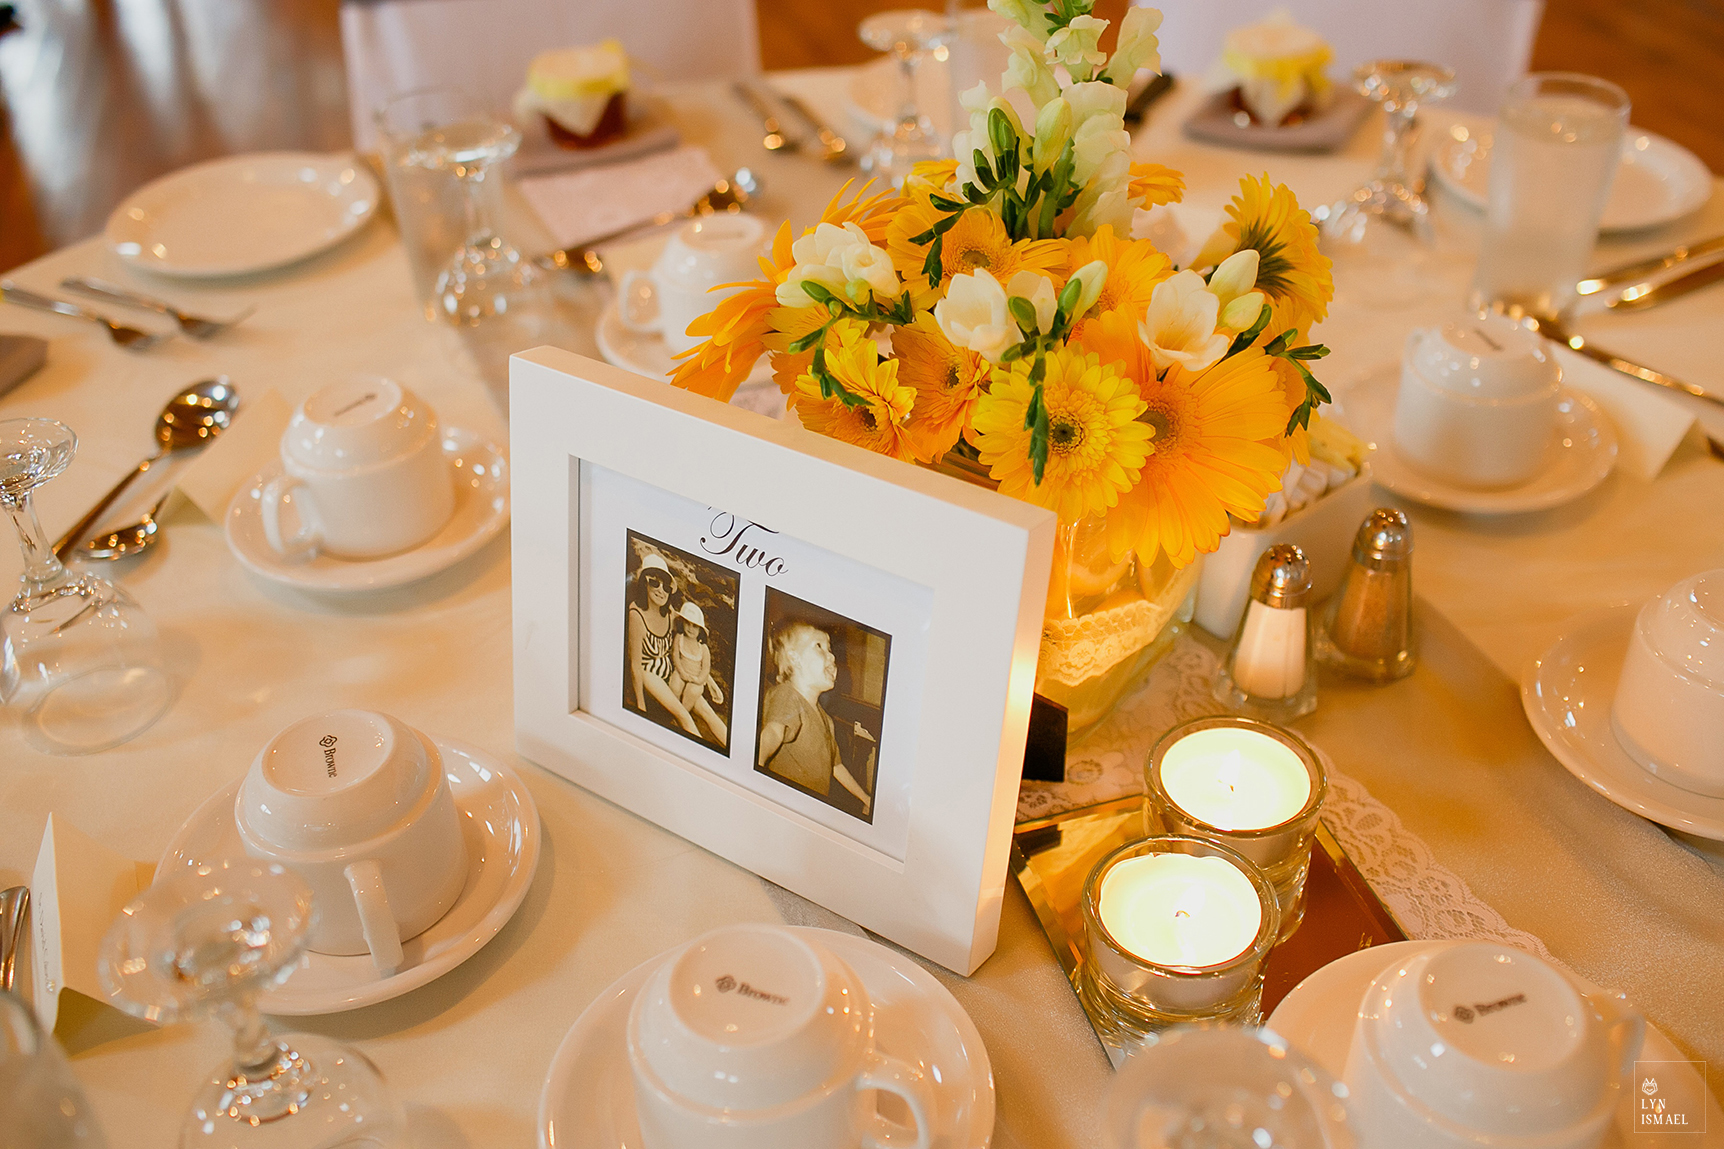 Table numbers decor featuring their childhood photos at a Grey Silo wedding reception